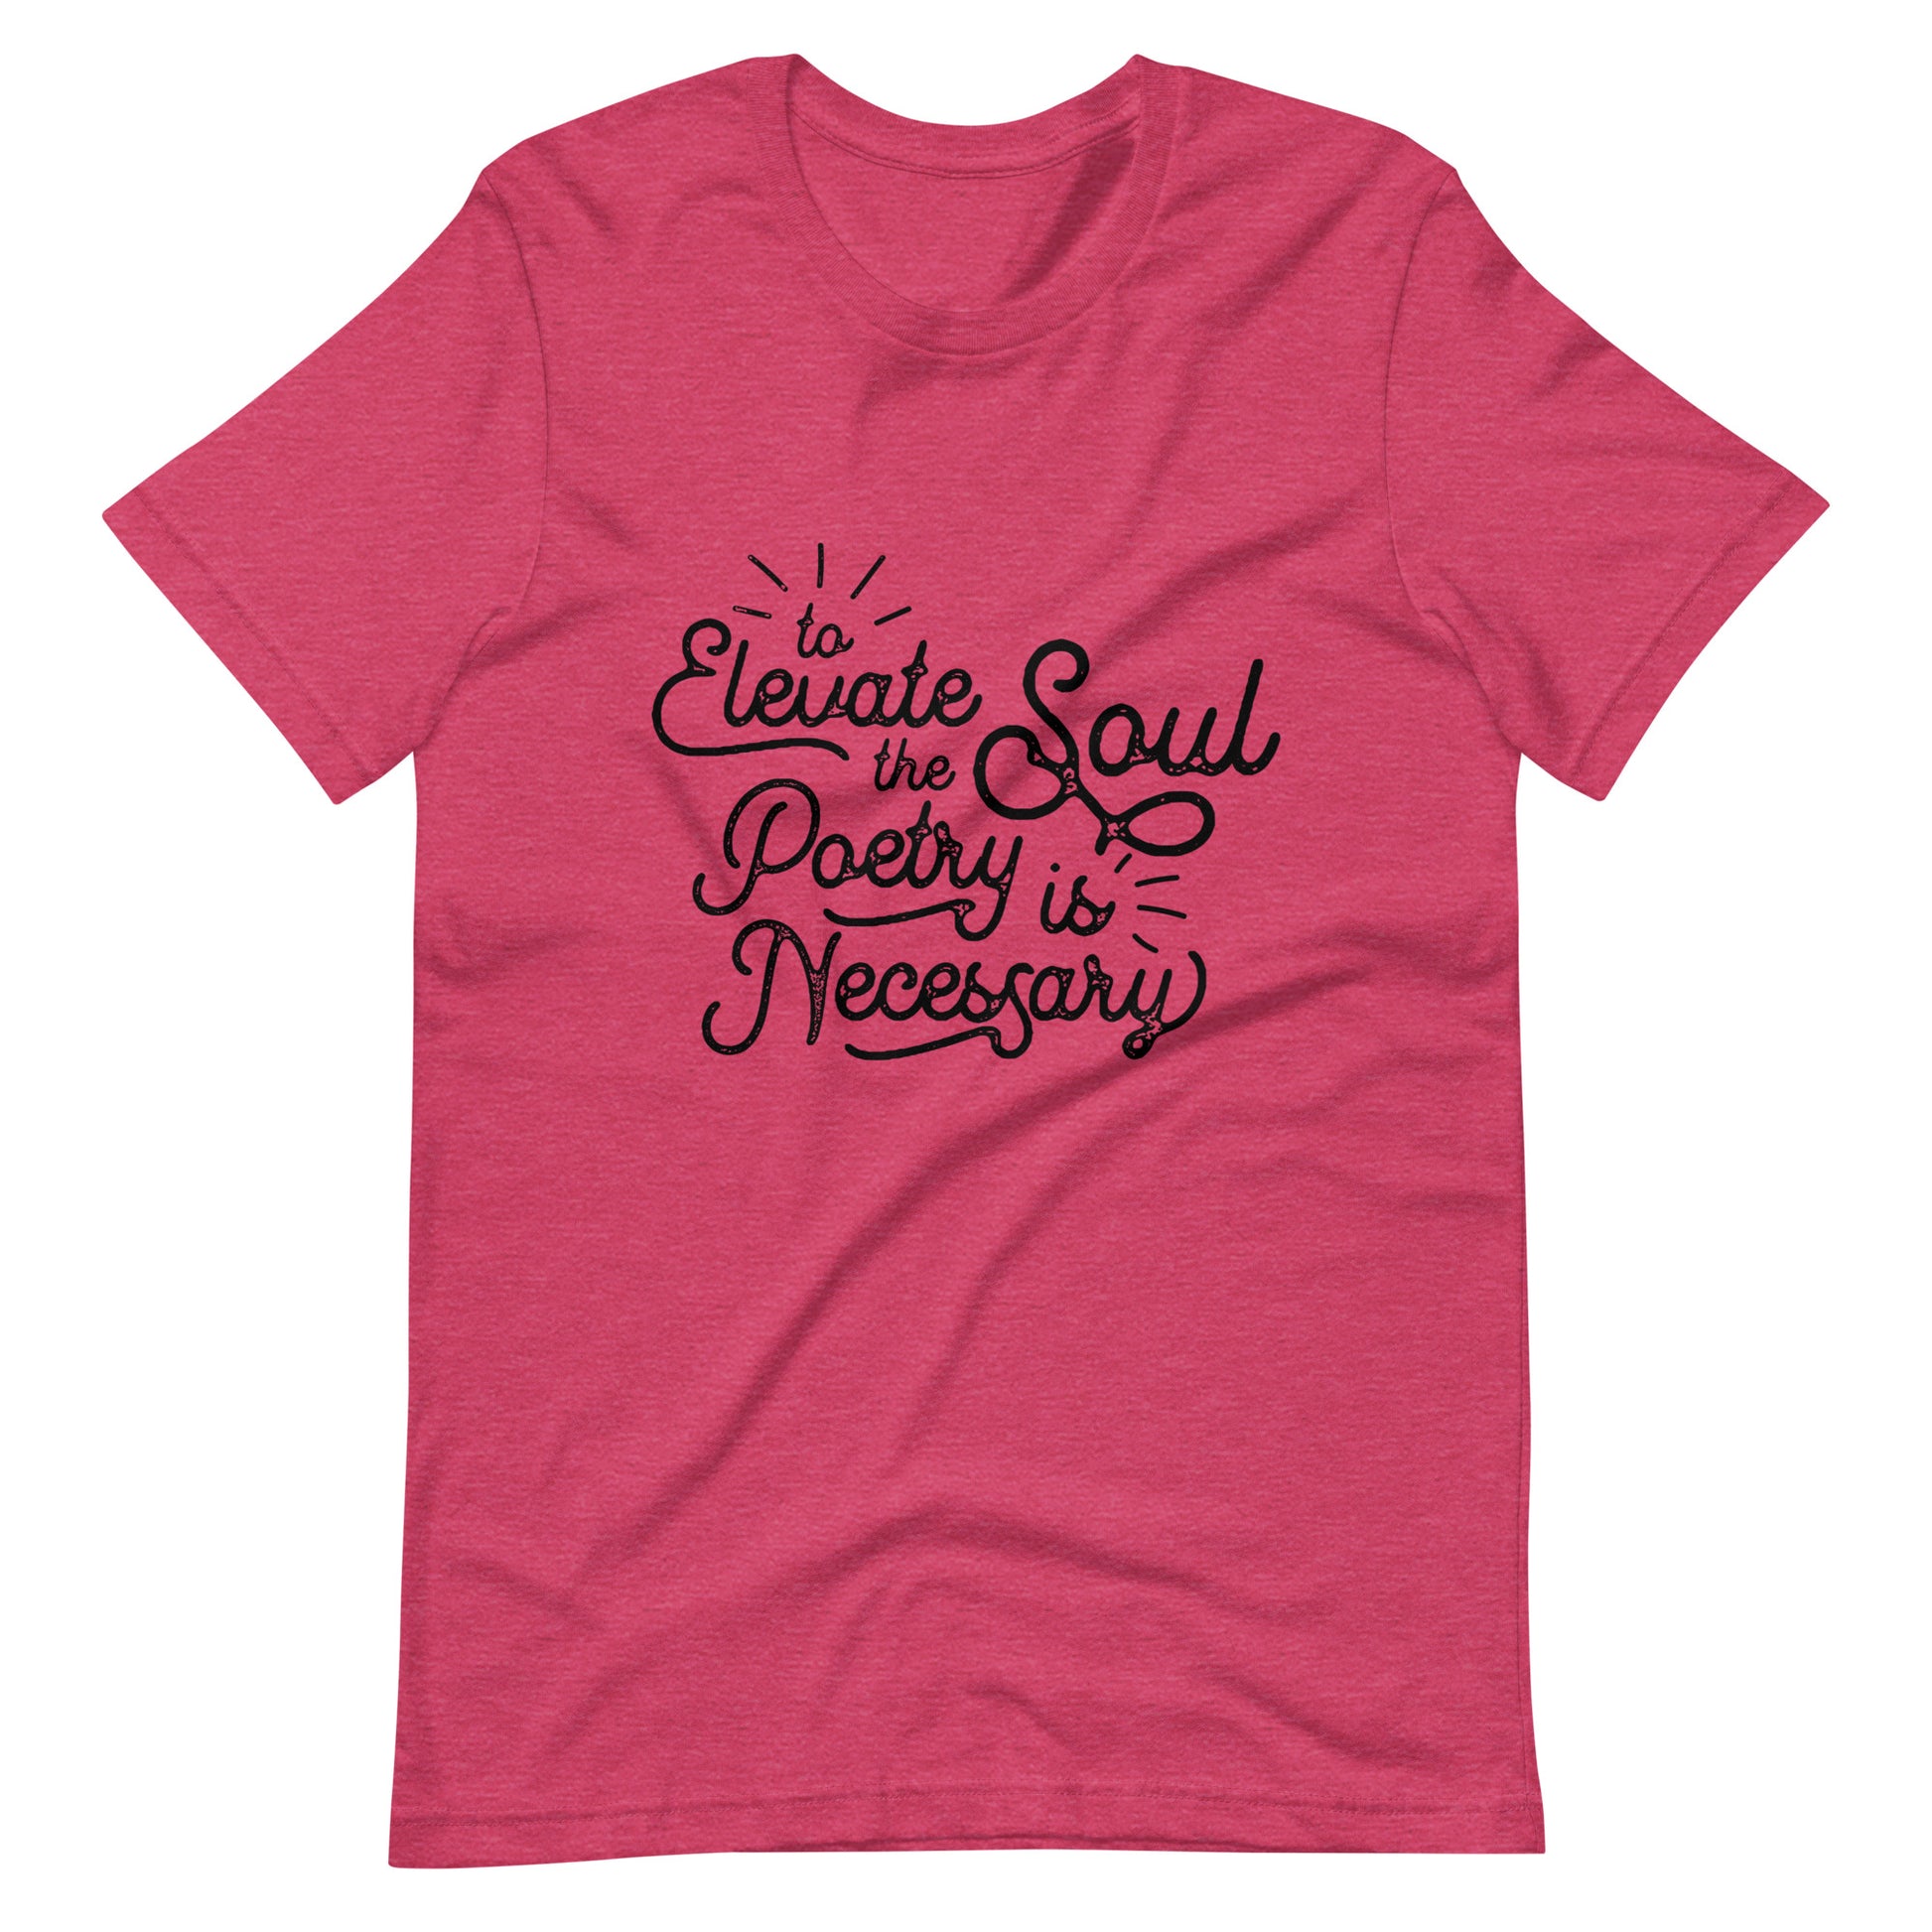 To Elevate the Soul Edgar Allan Poe Quote - Men's t-shirt - Heather Raspberry Front